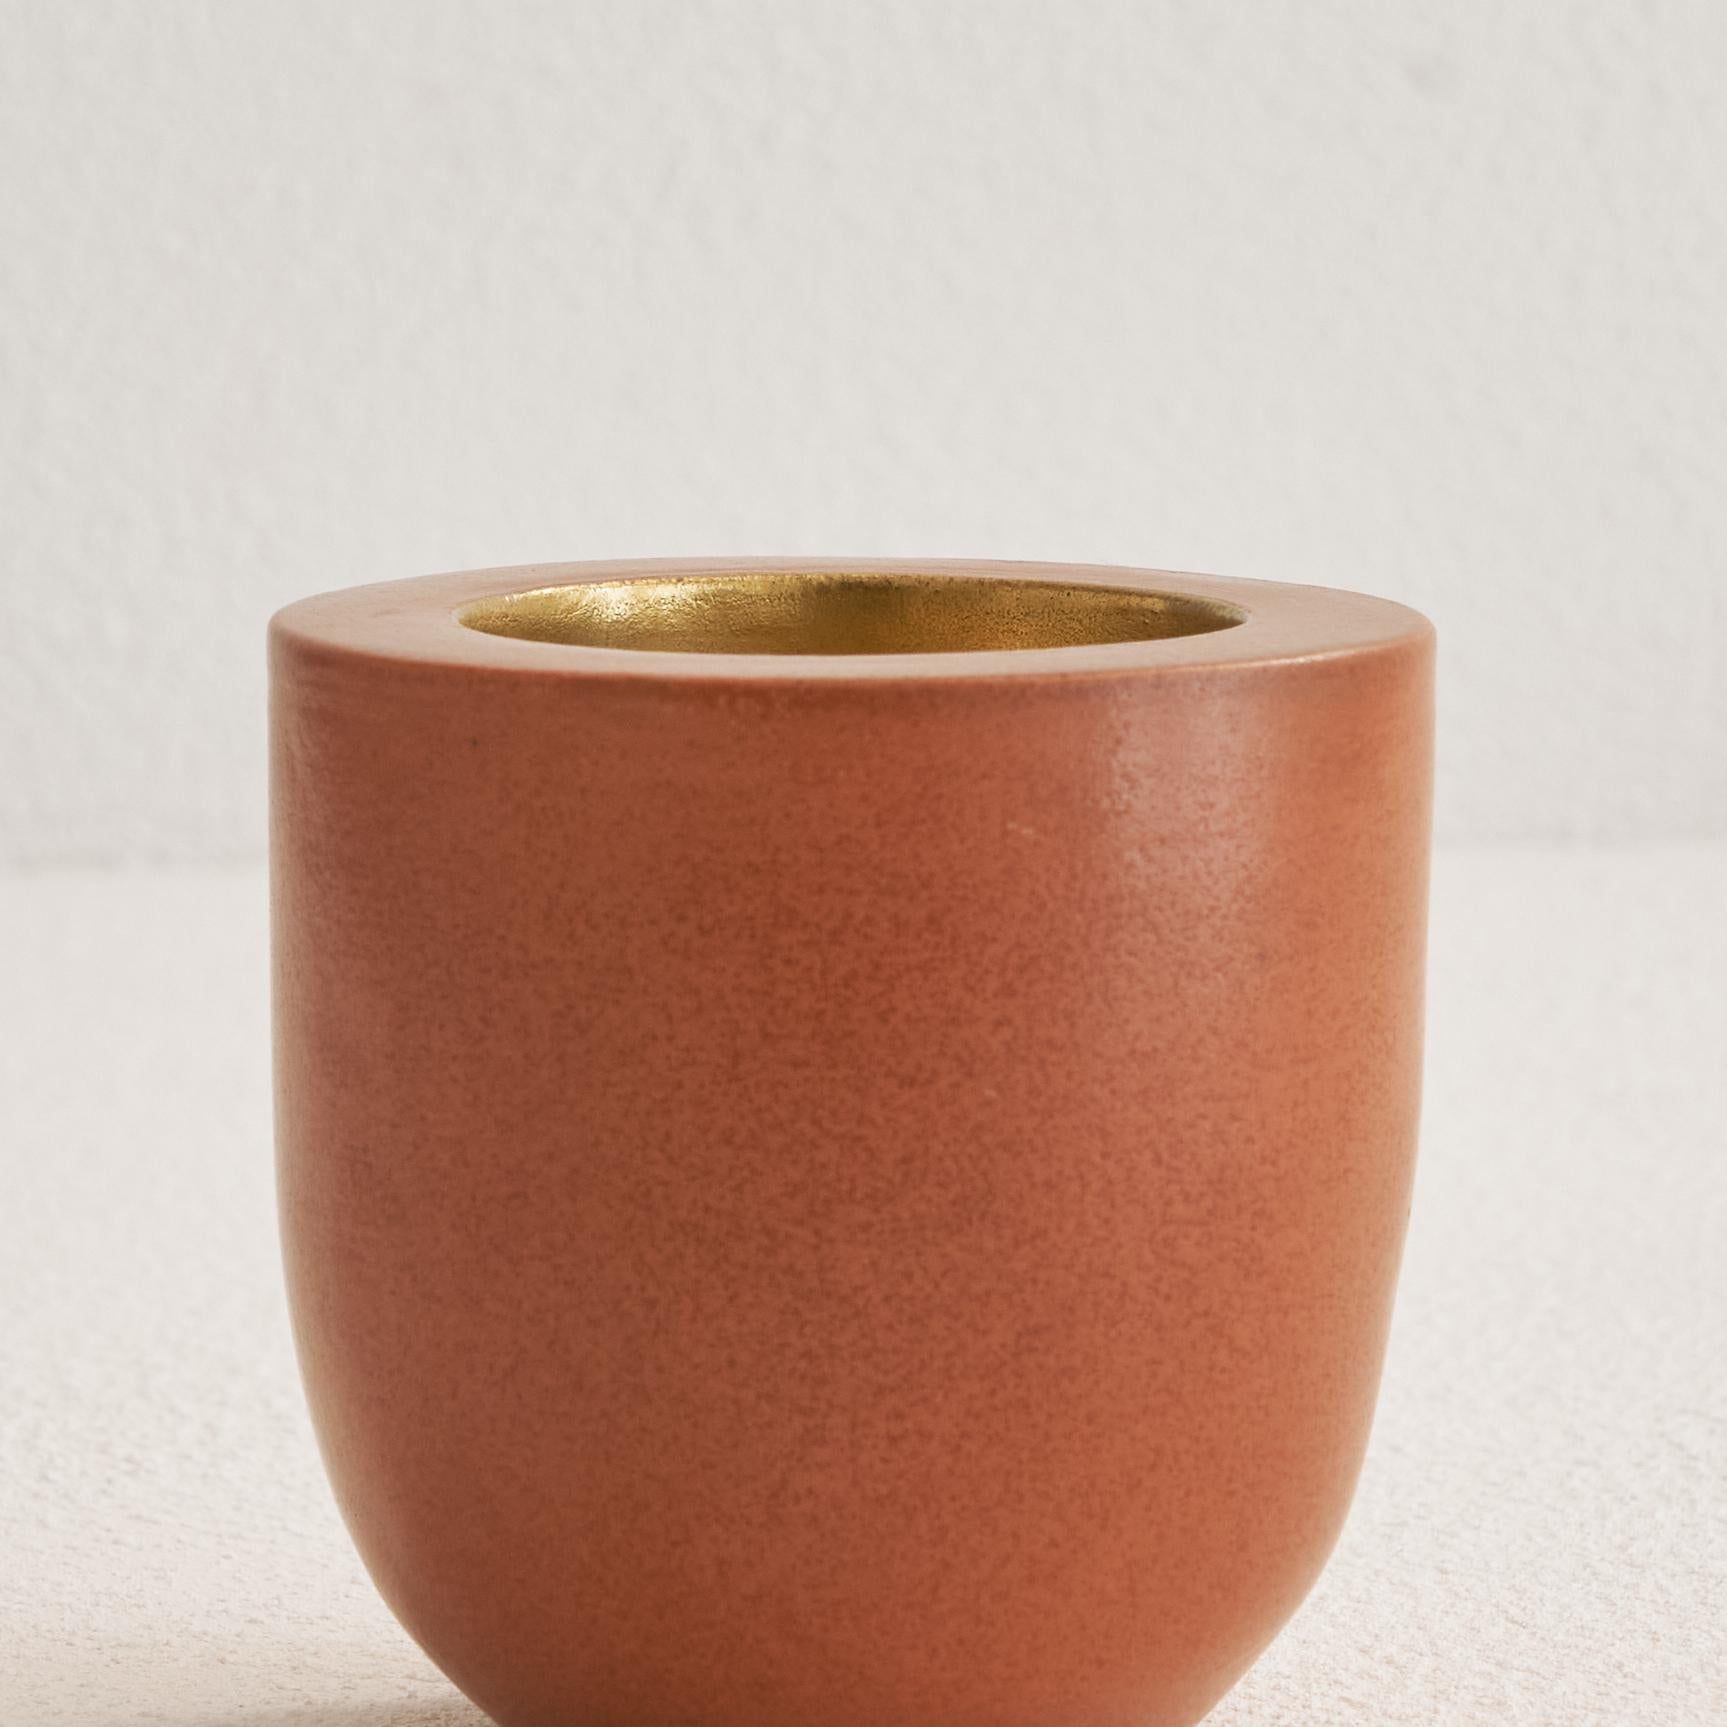 Gio Ponti for Richard Ginori Vase in Terracotta and Gold, 1930s In Good Condition For Sale In Tilburg, NL